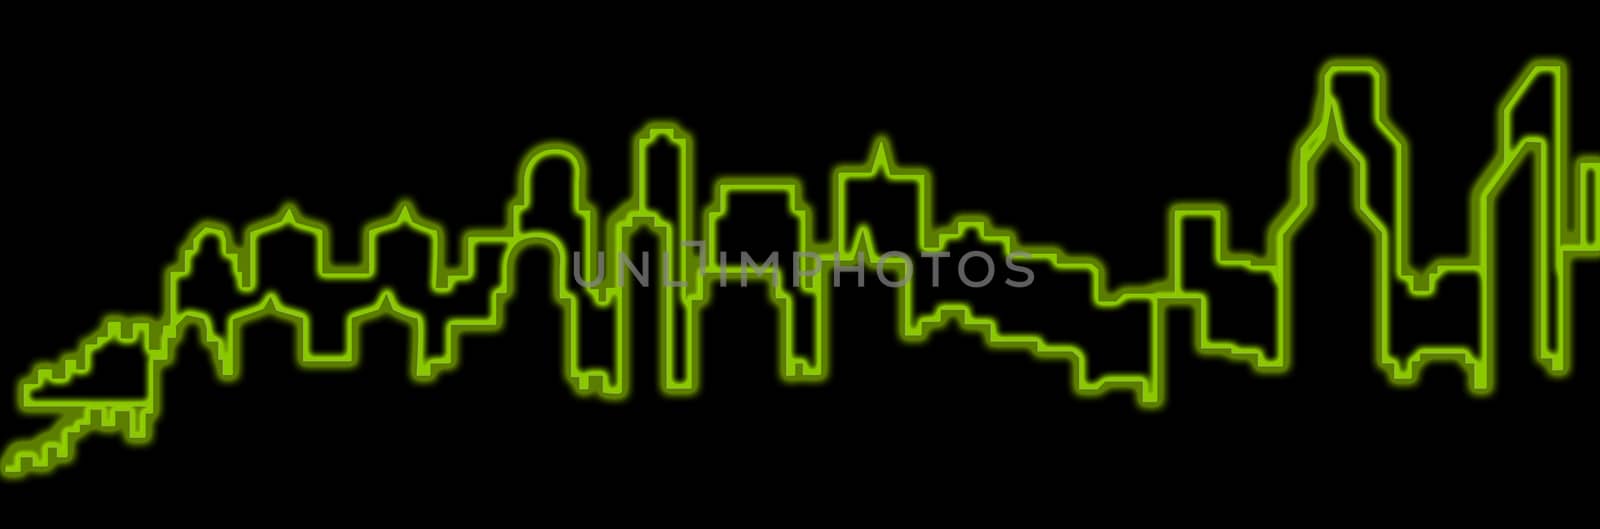 sicy skyline in blue neon light with black background